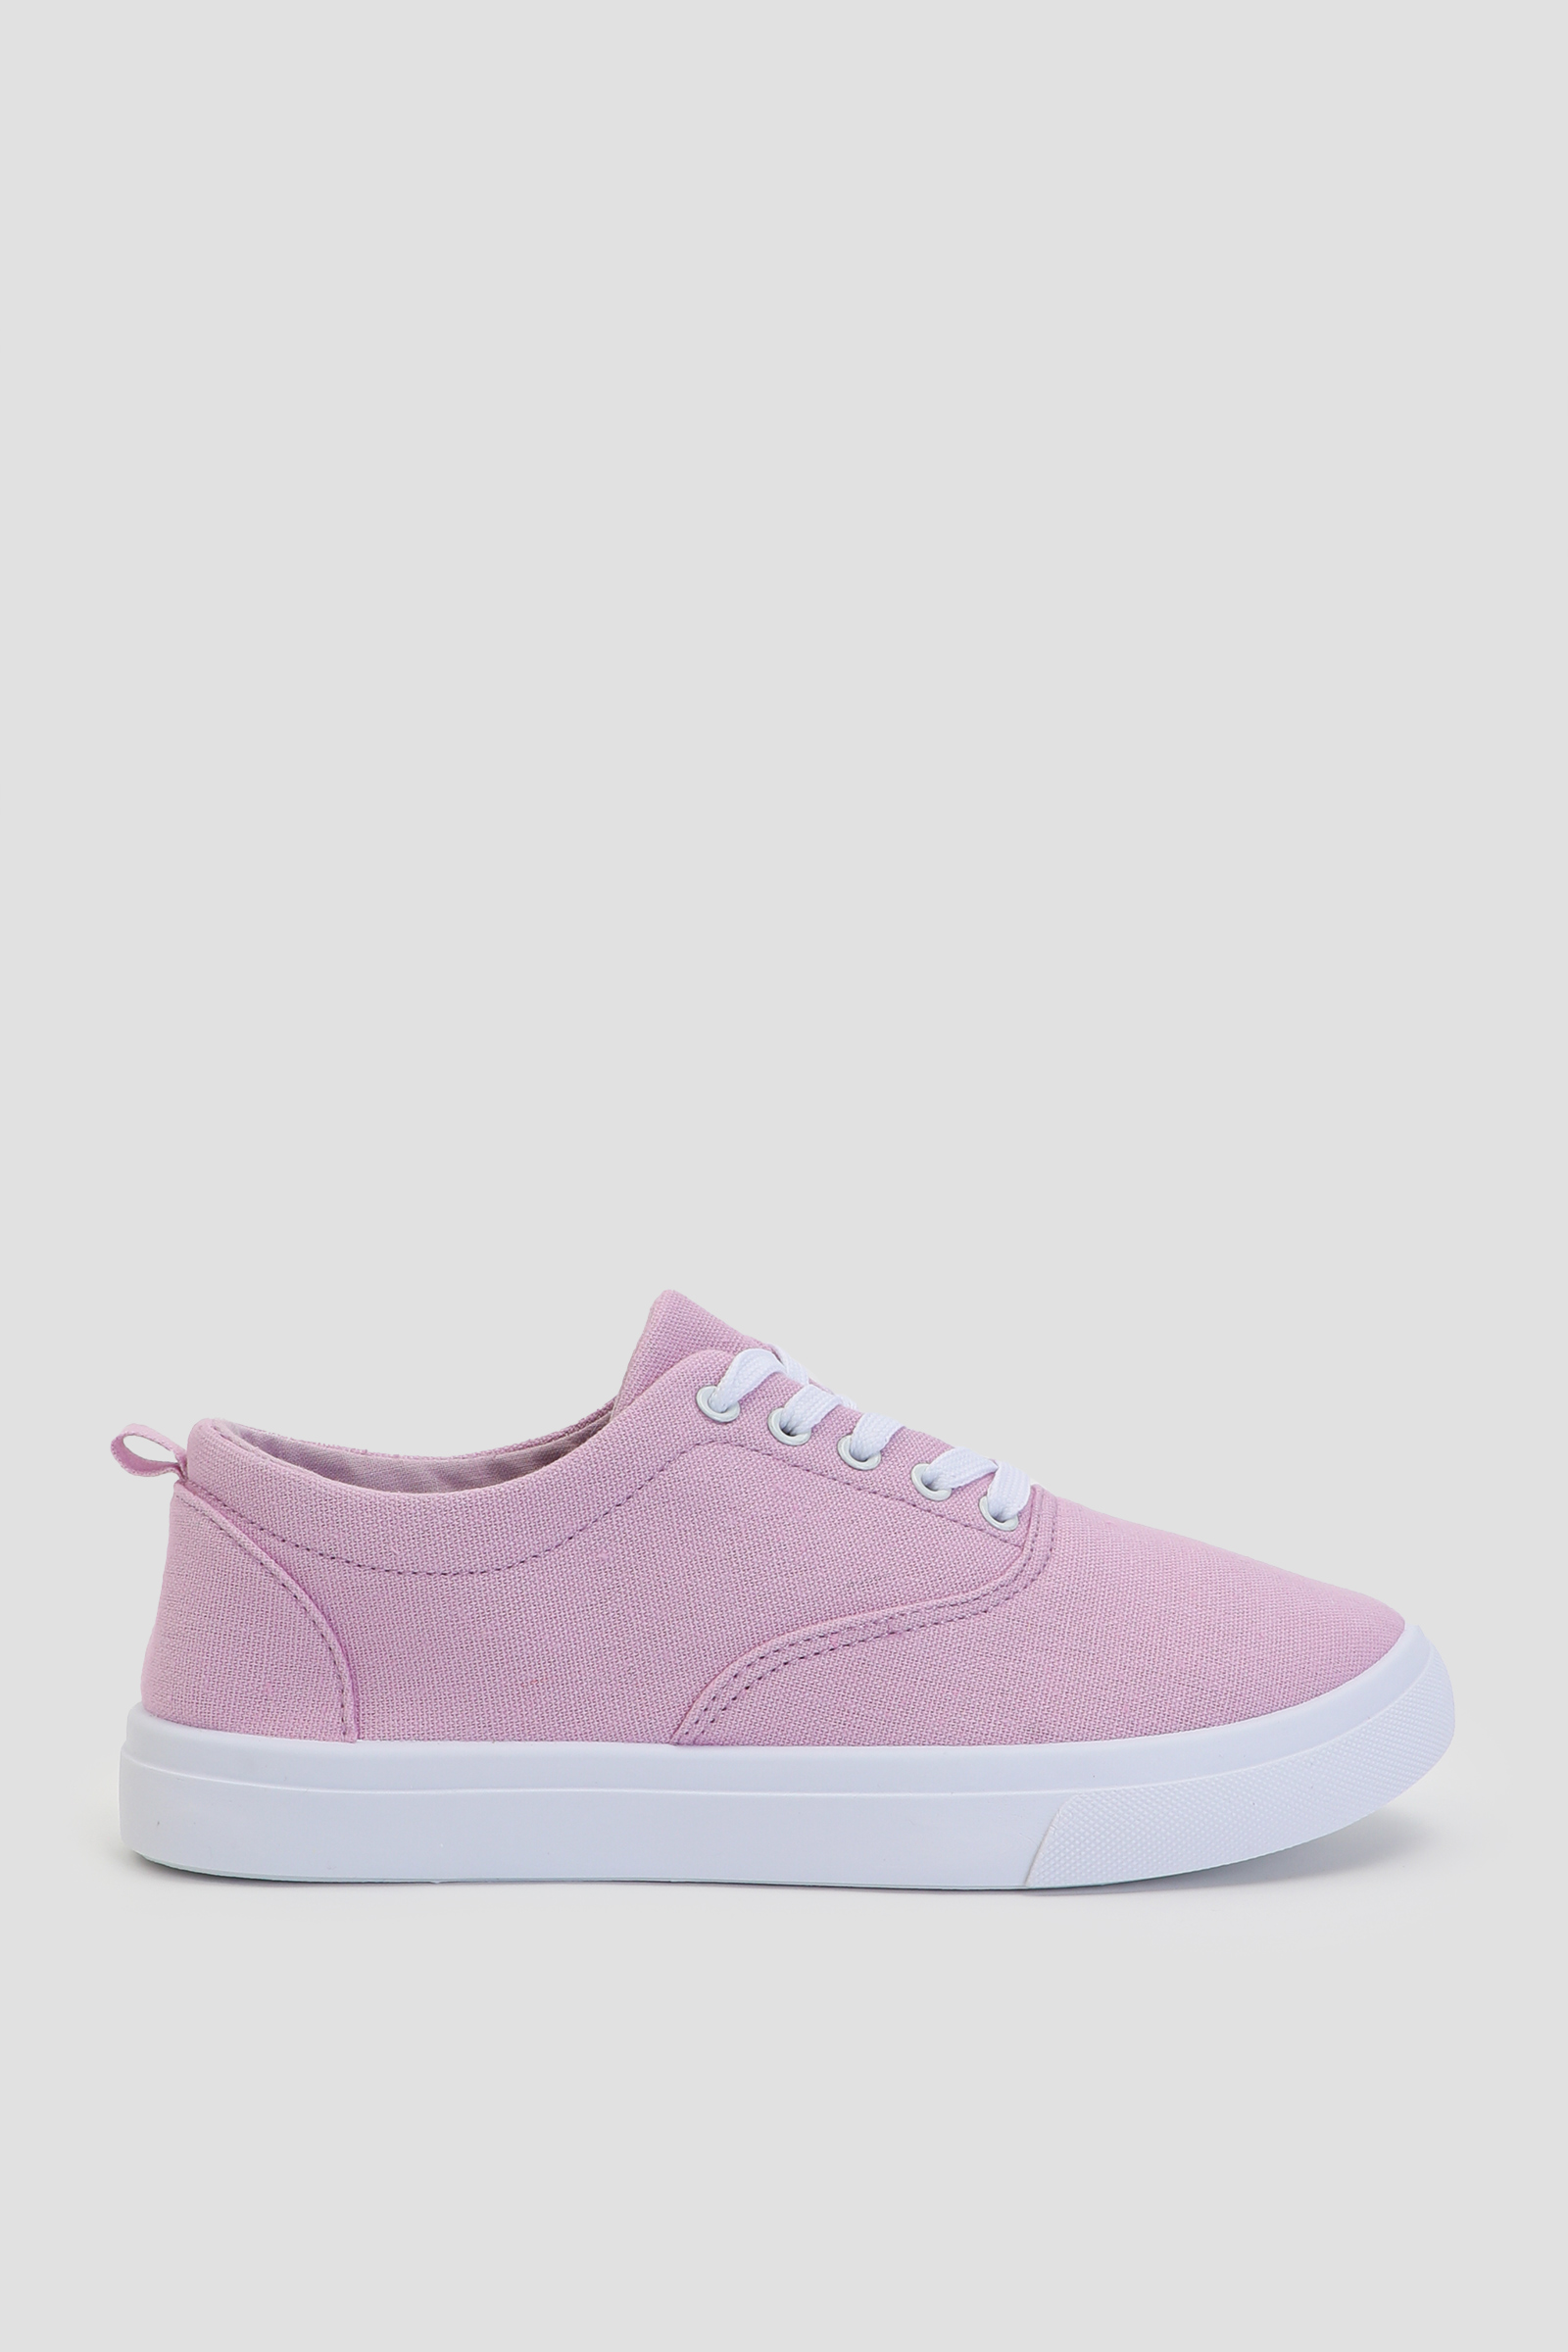 Ardene Canvas Low Top Sneakers in Light Pink | Size | Rubber | Eco-Conscious | 100% Recycled